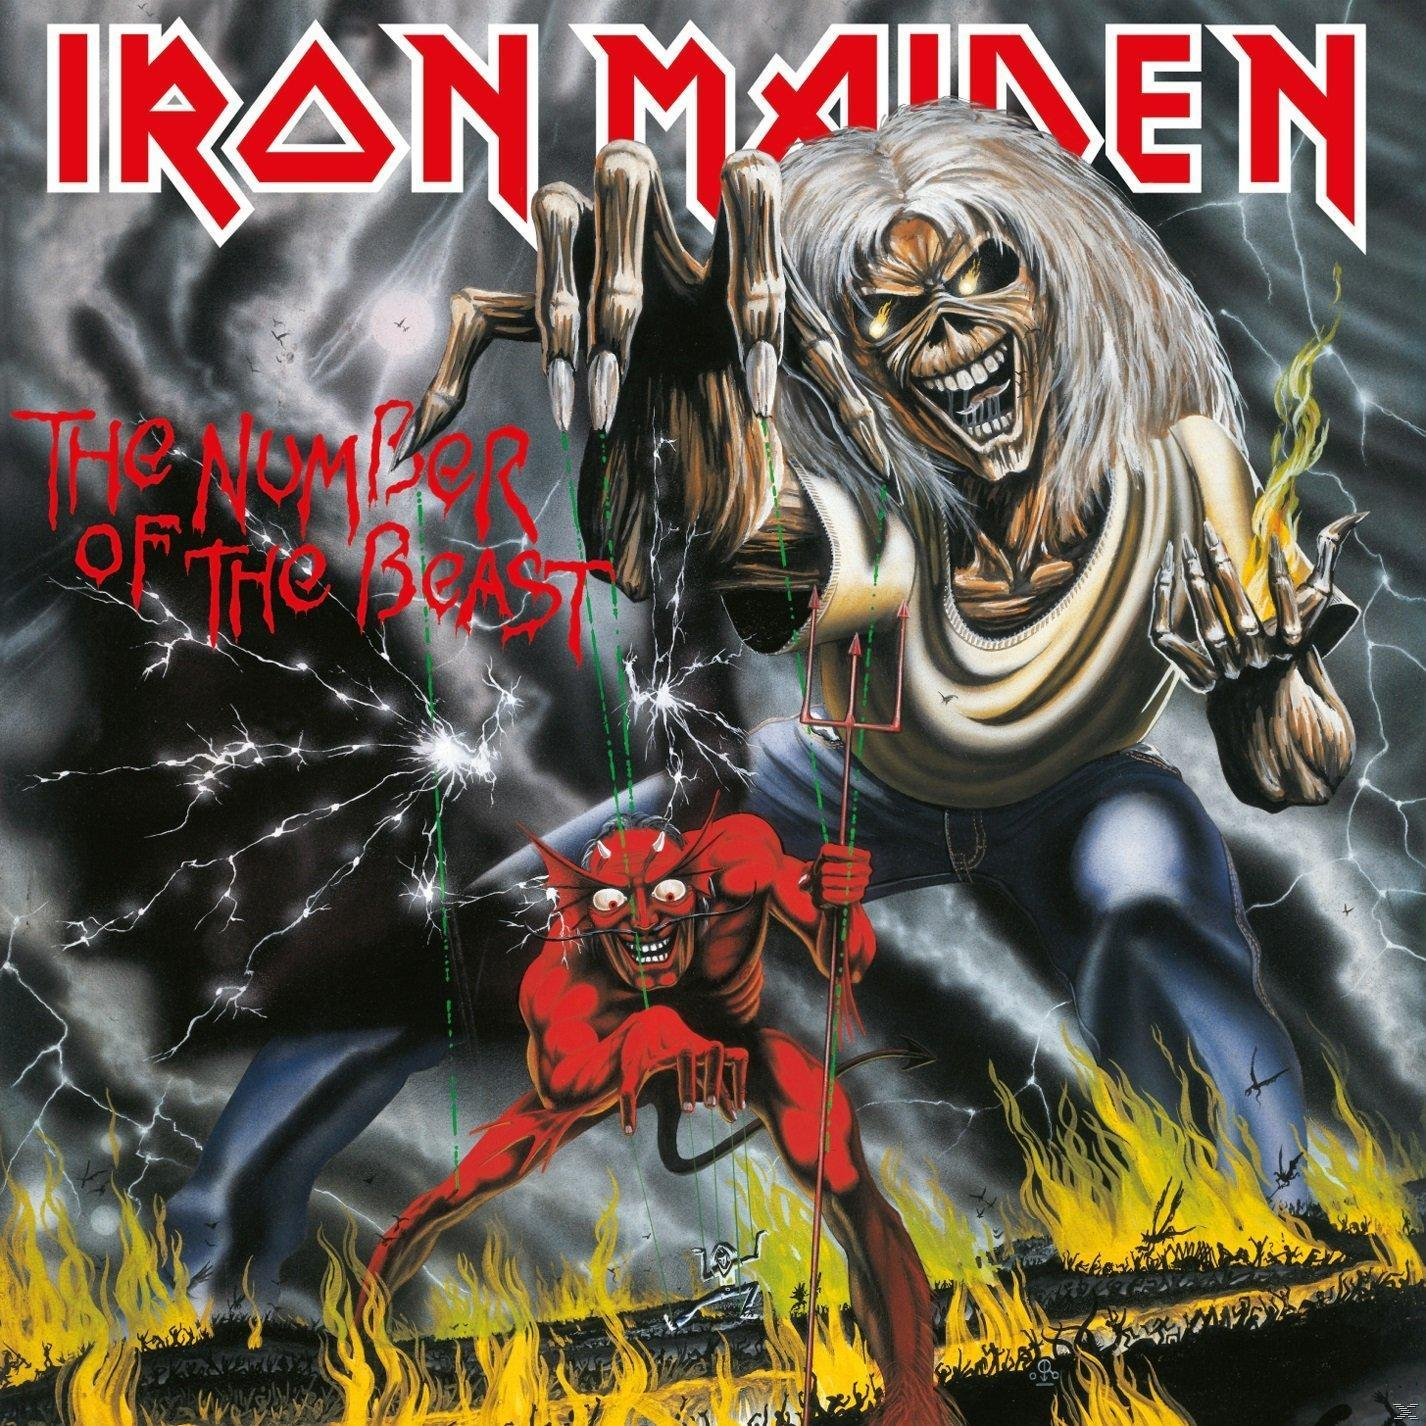 Of The Iron (Vinyl) Number Maiden - The - Beast